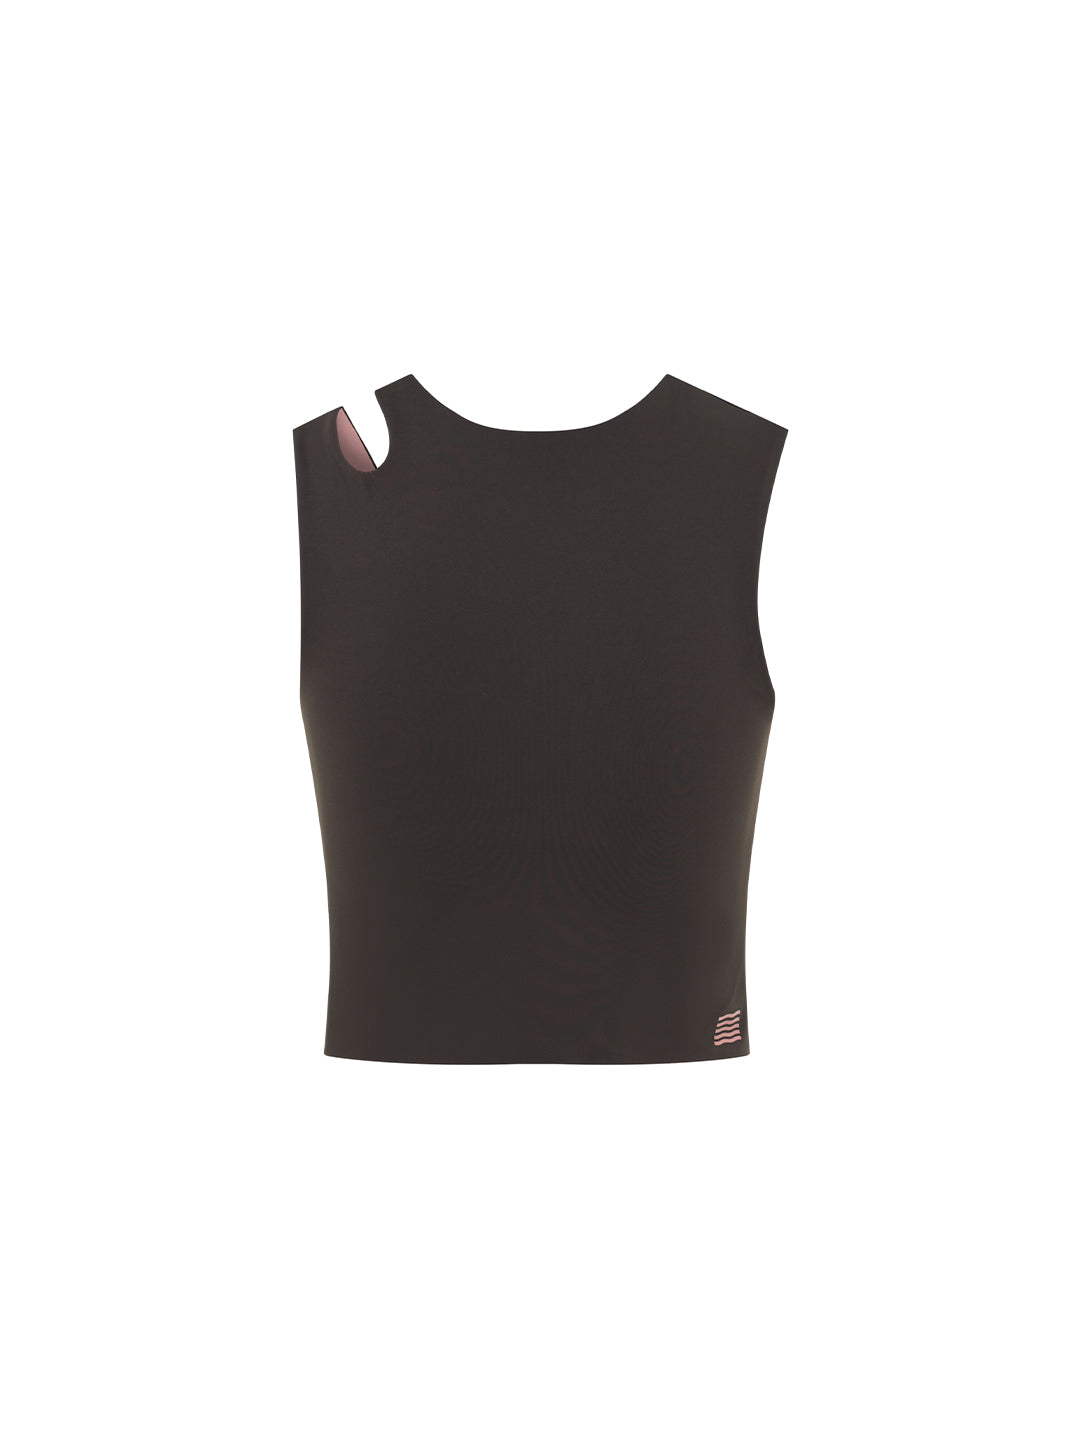 Connection Reversible Crop Top - Chocolate